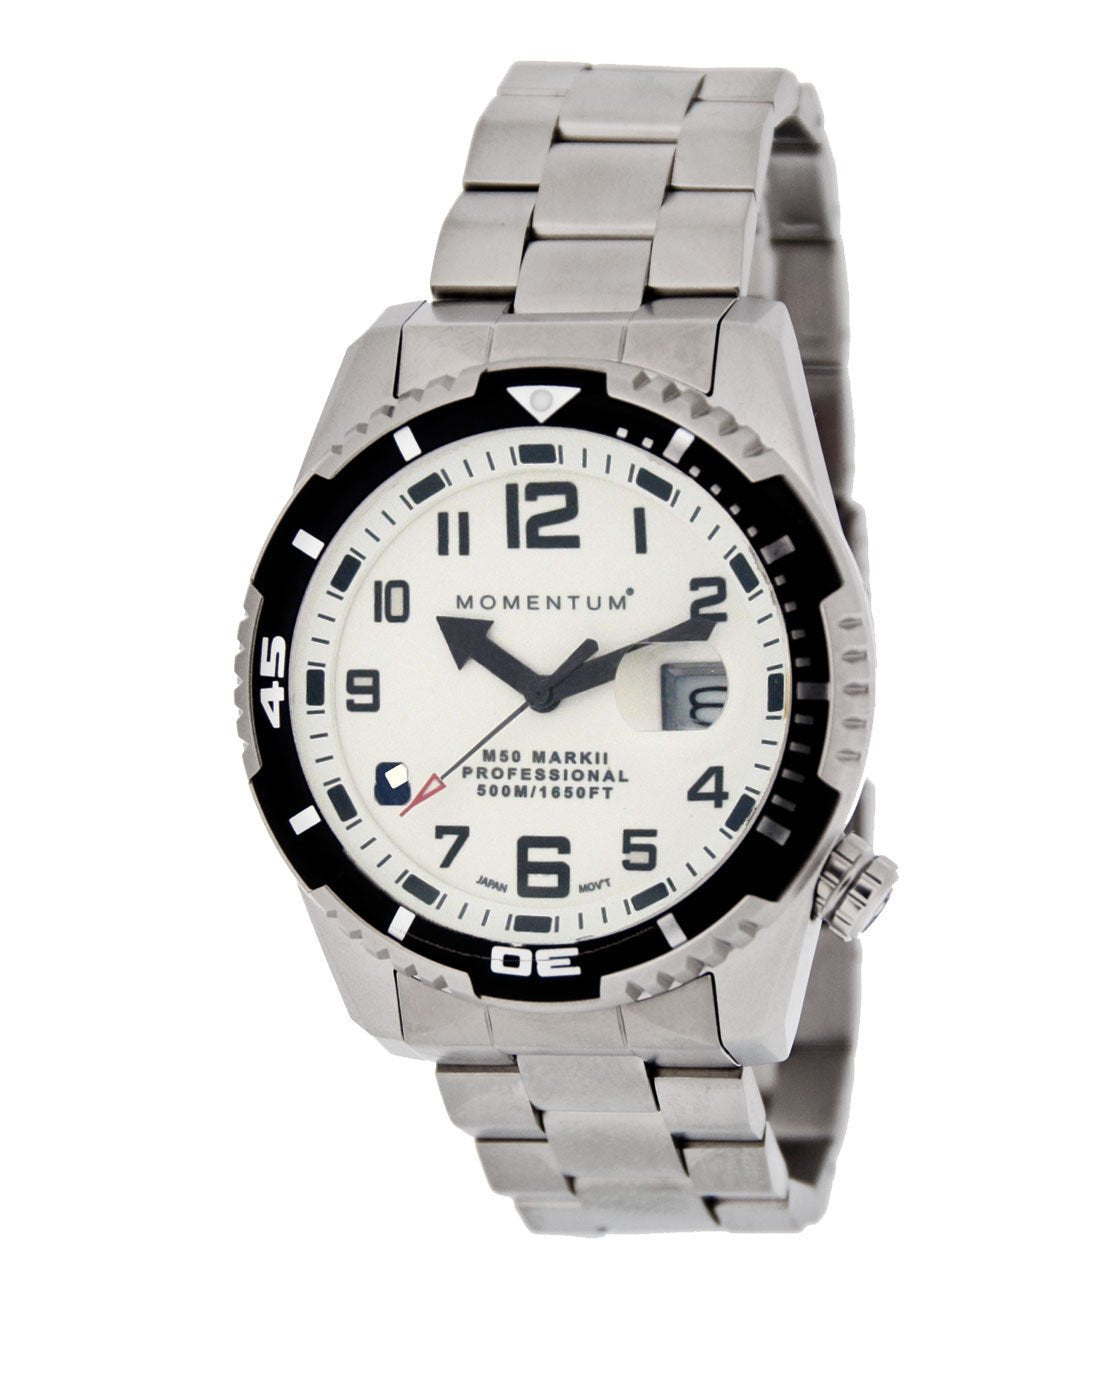 Momentum Watch - M50 Military Dive - White Dial on Steel bracelet